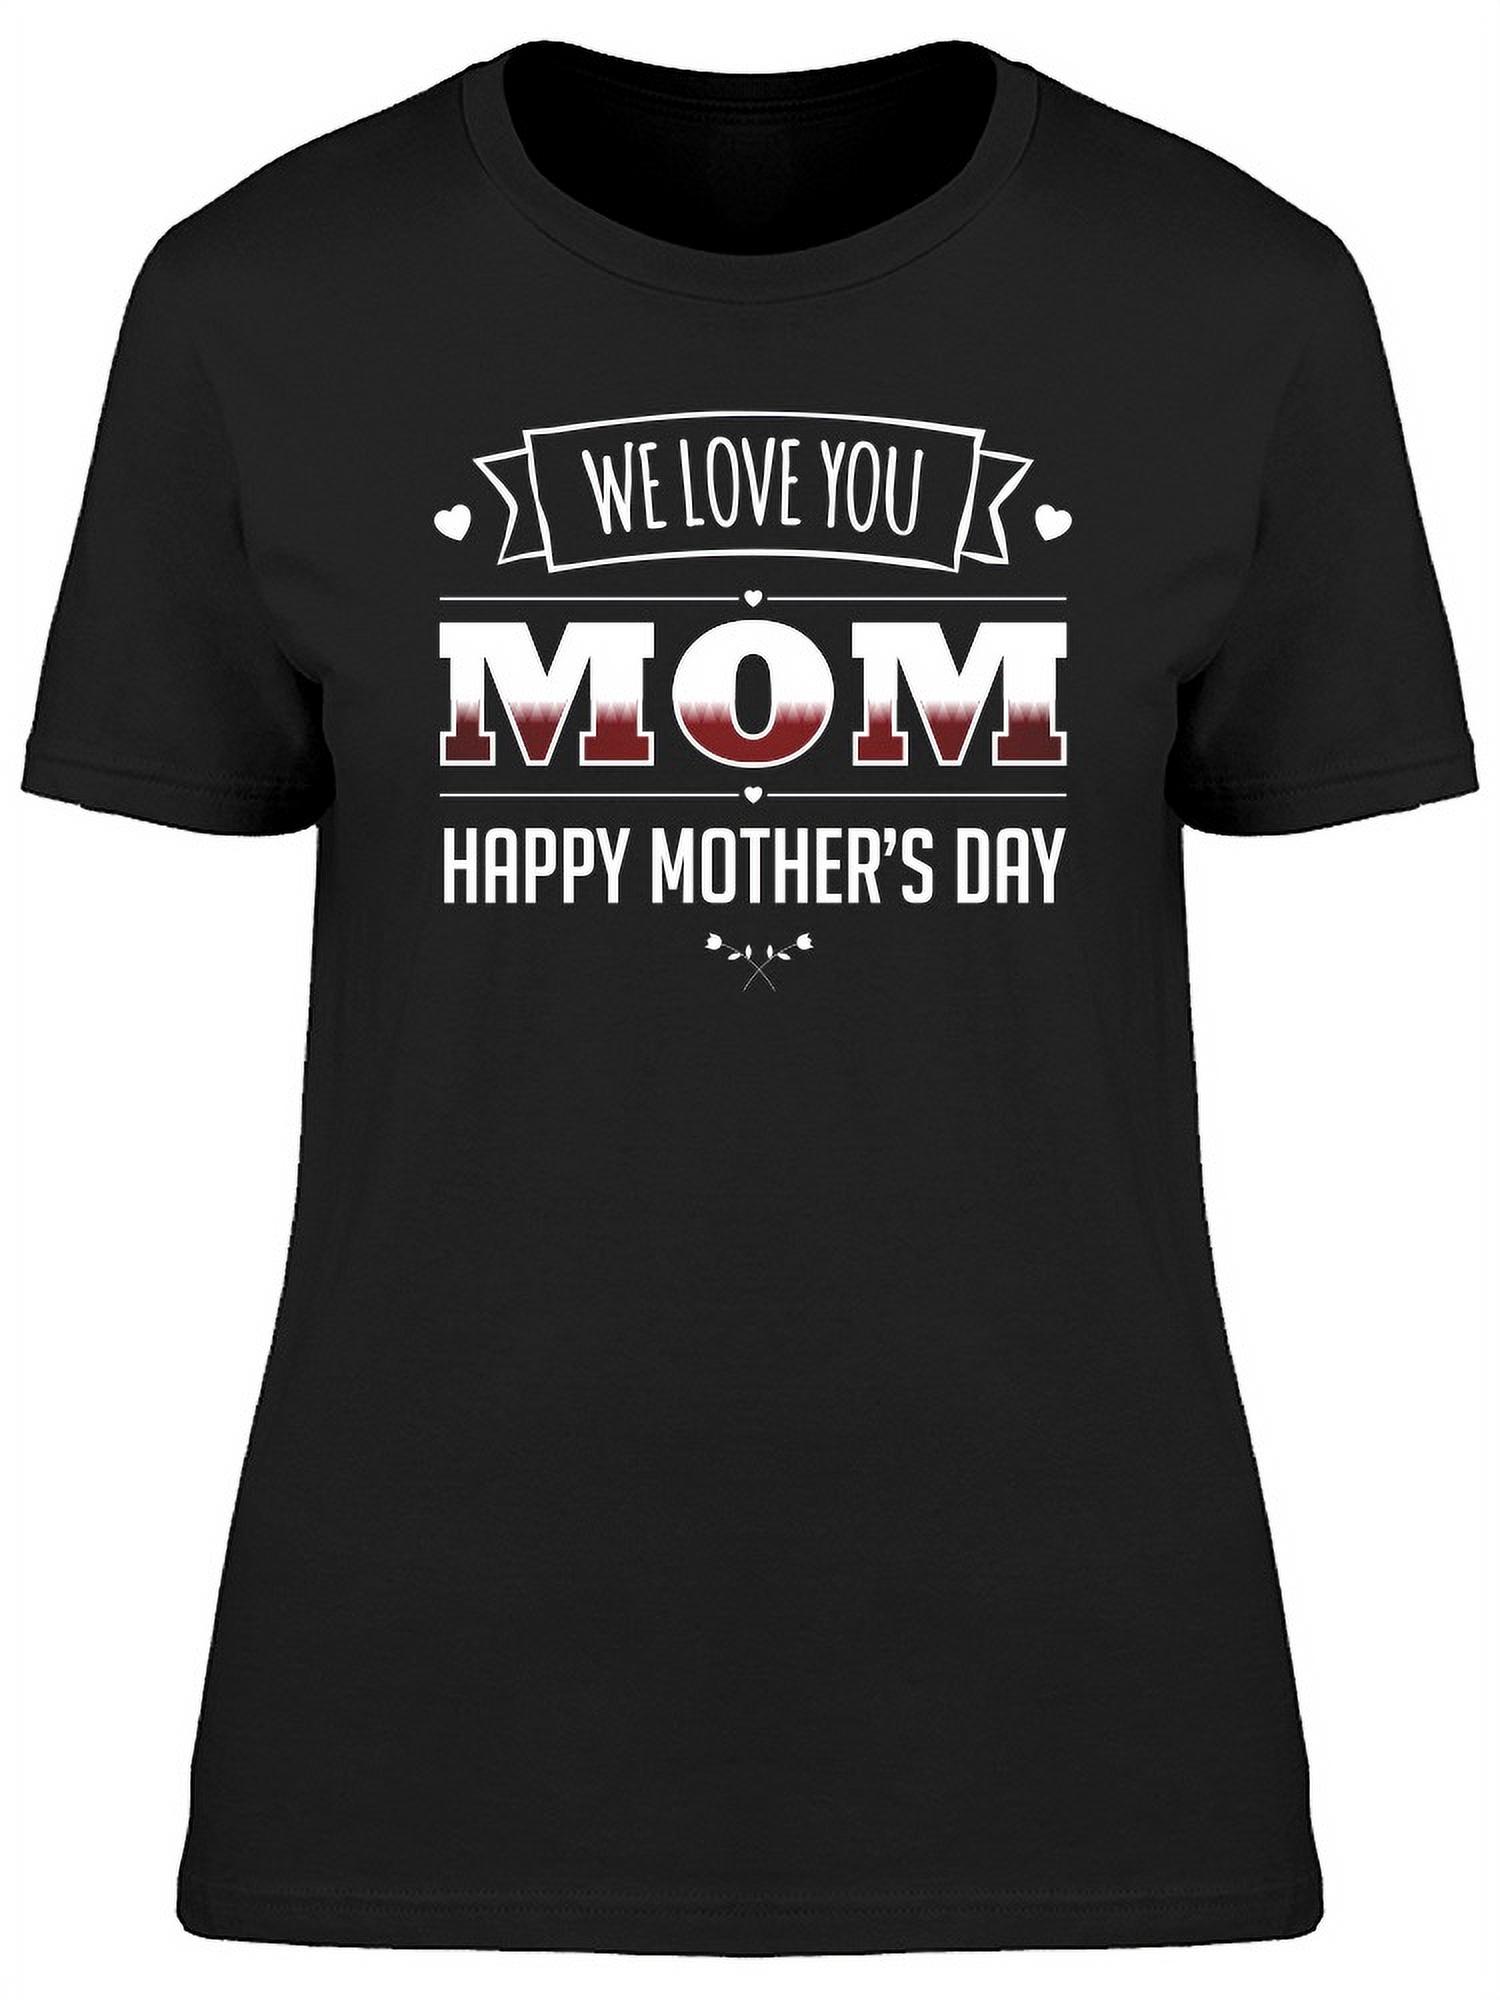 We Love You Mom Happy Mother Day T Shirt Women Image By Shutterstock Small